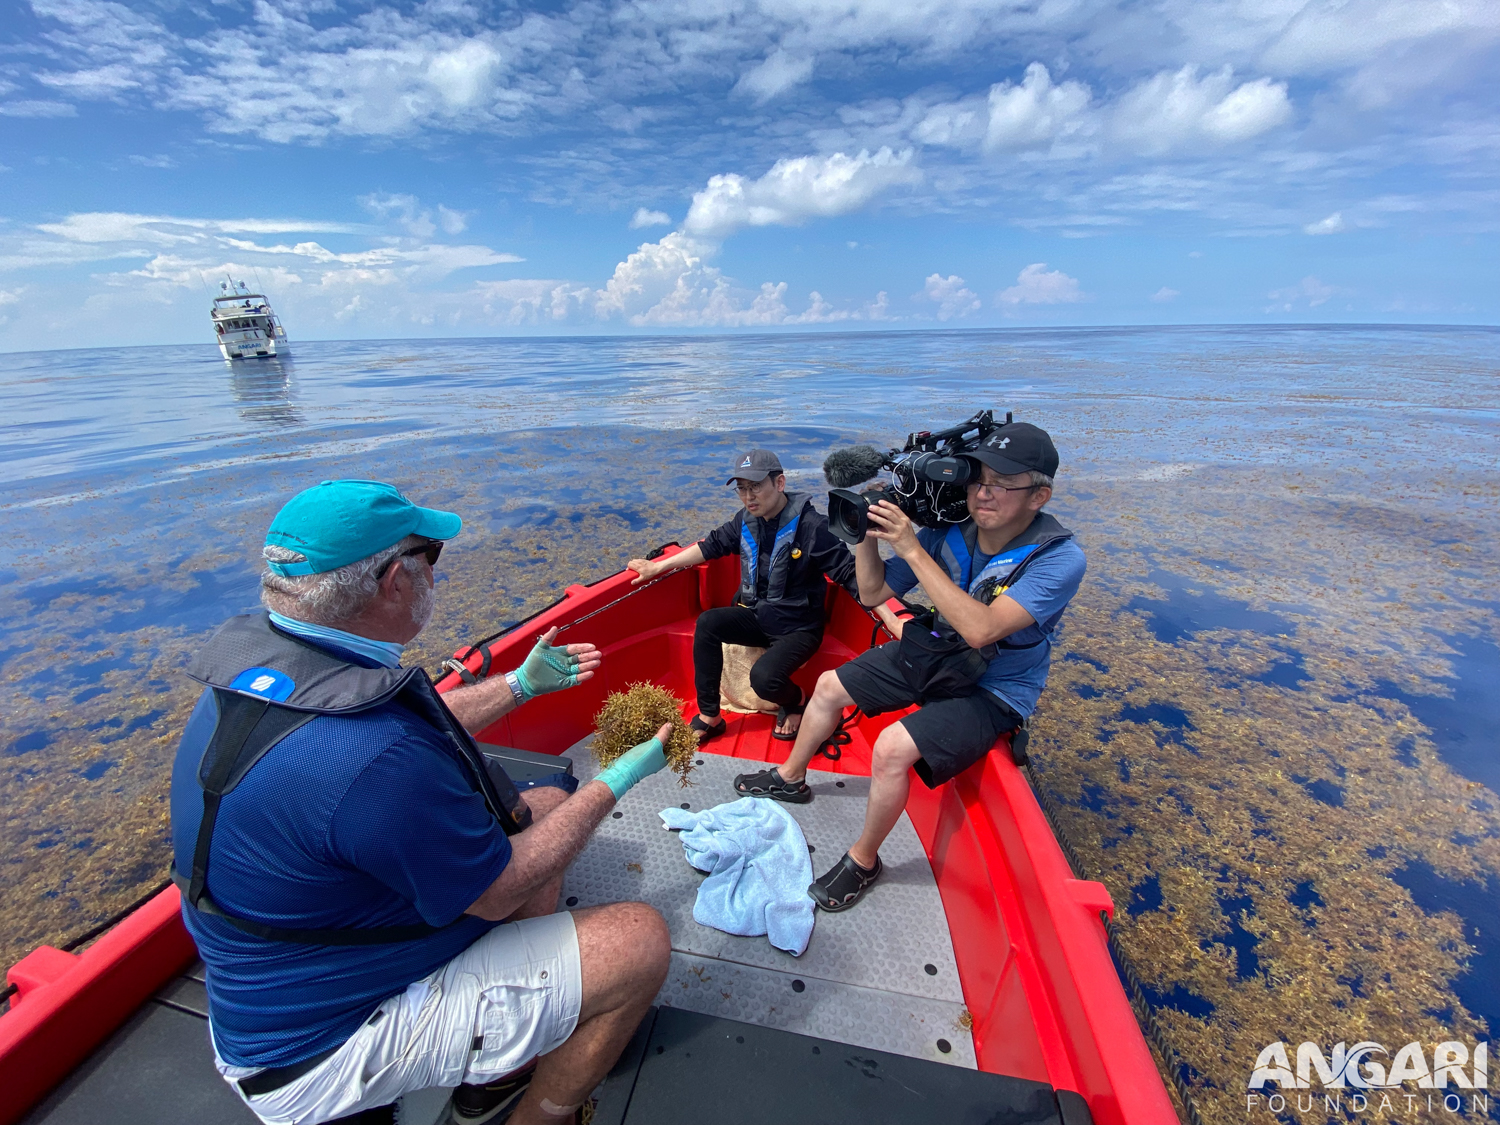 EXP 64: NHK Japan's Media Crew Joined Scientist Brian Lapointe In The Middle Of The Ocean Surrounded By Sargassum. PC: Kevin Davidson